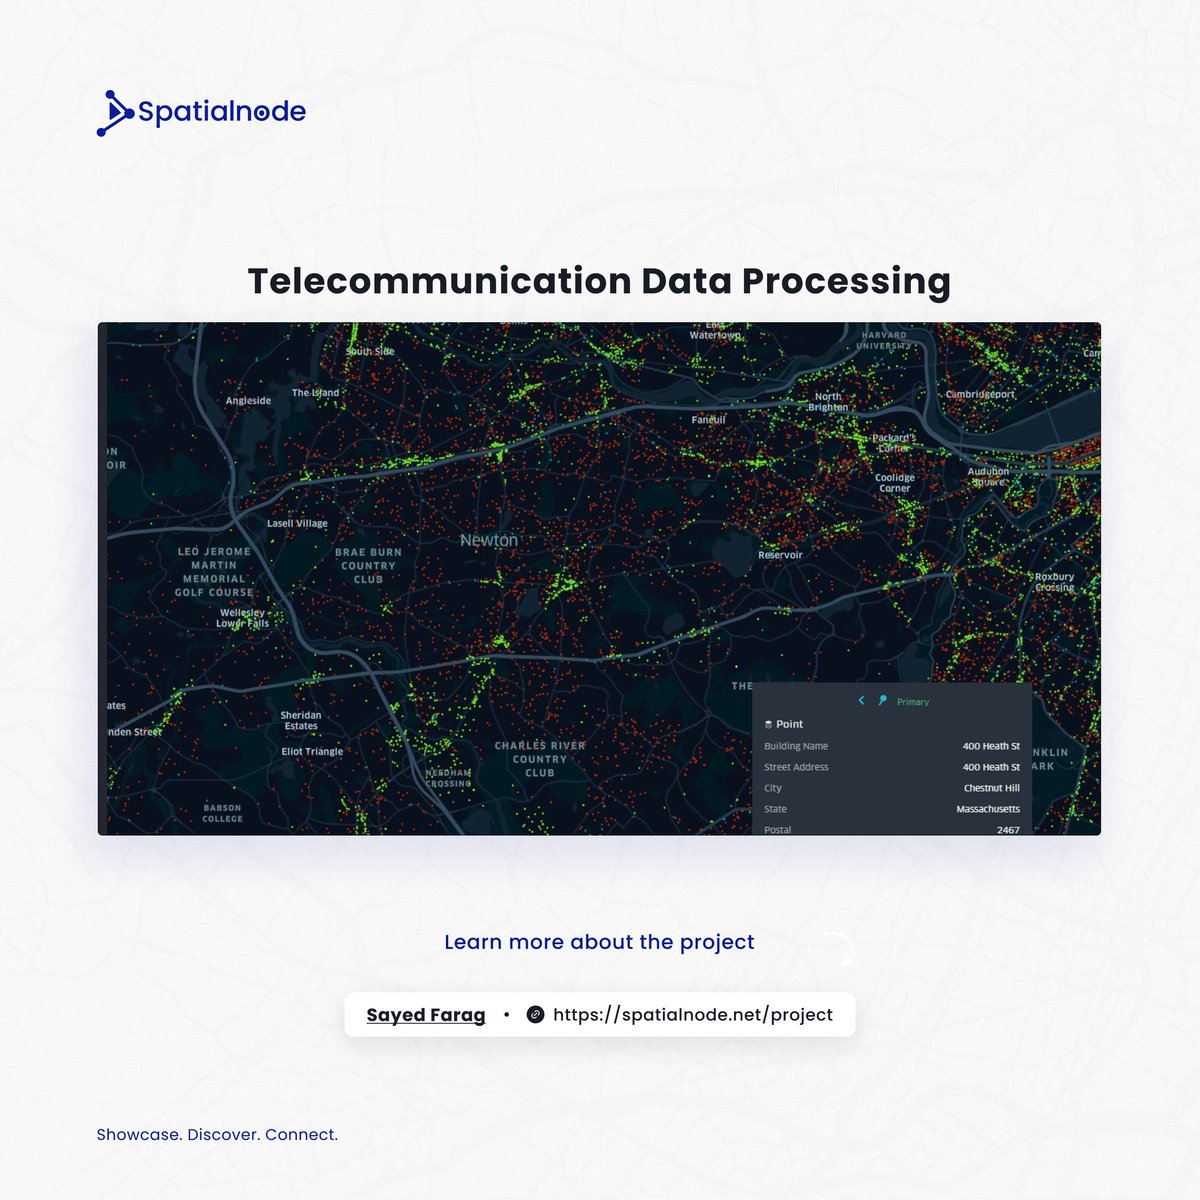 Project O'clock!

Check out this interesting project on Spatialnode, which delves into spatial data processing.

Explore here: spatialnode.net/projects/telec…

#geospatial #dataprocessing #spatialdata